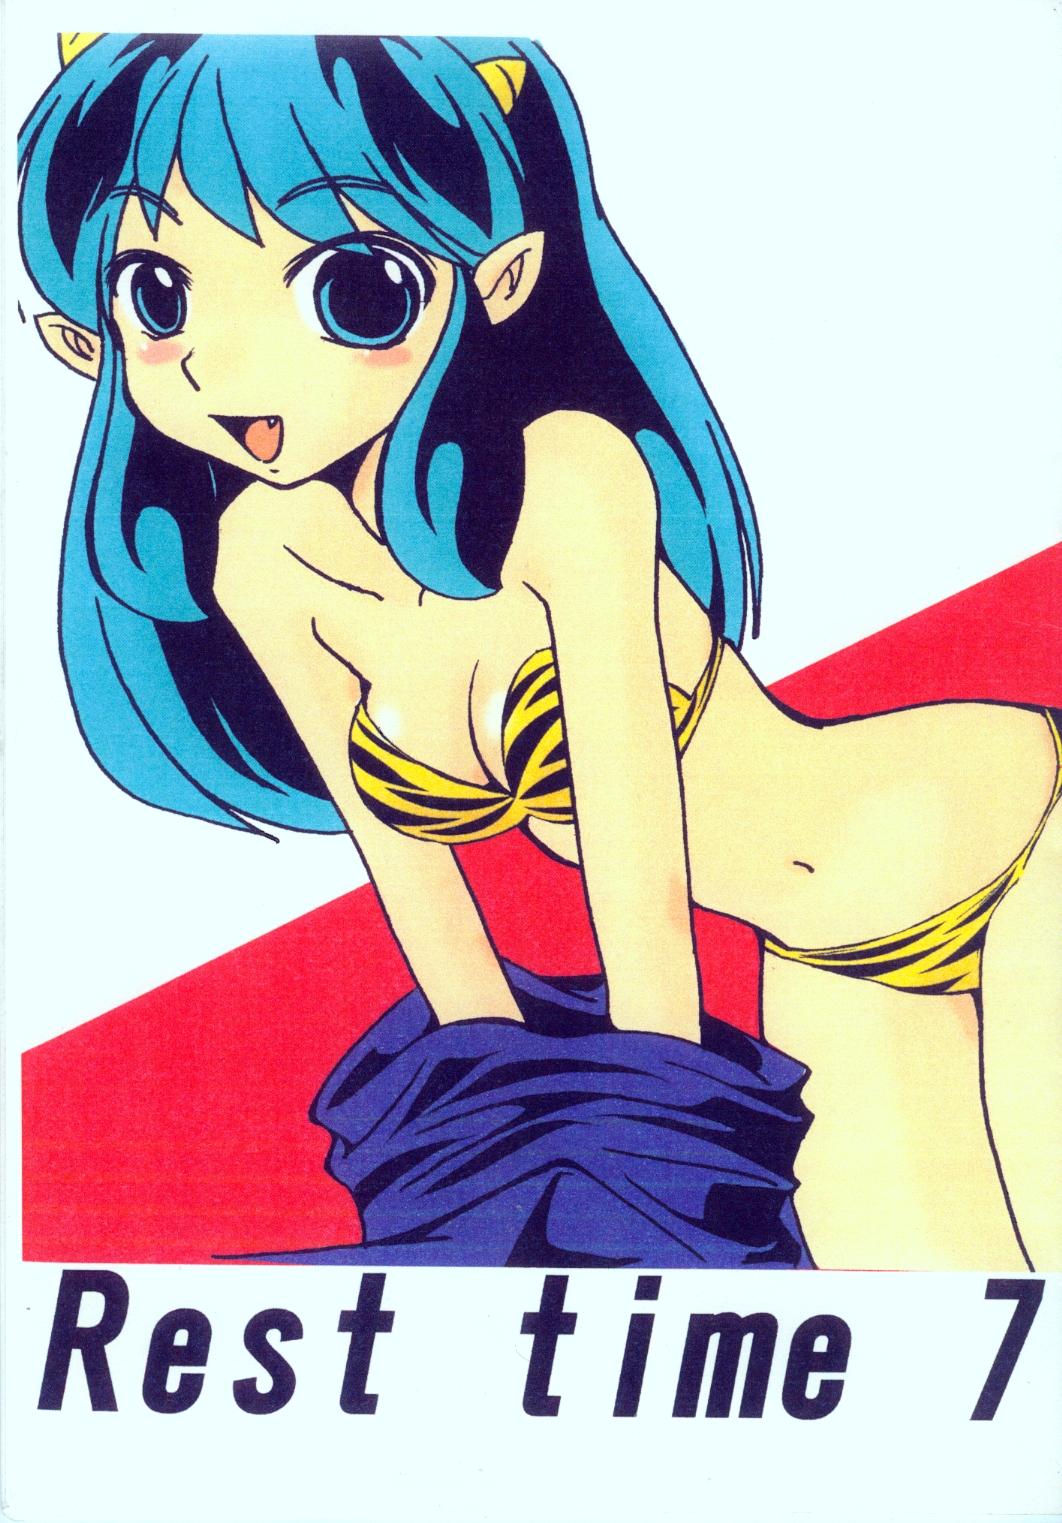 Blowjob Contest Rest time 7 - Urusei yatsura Awesome - Page 1